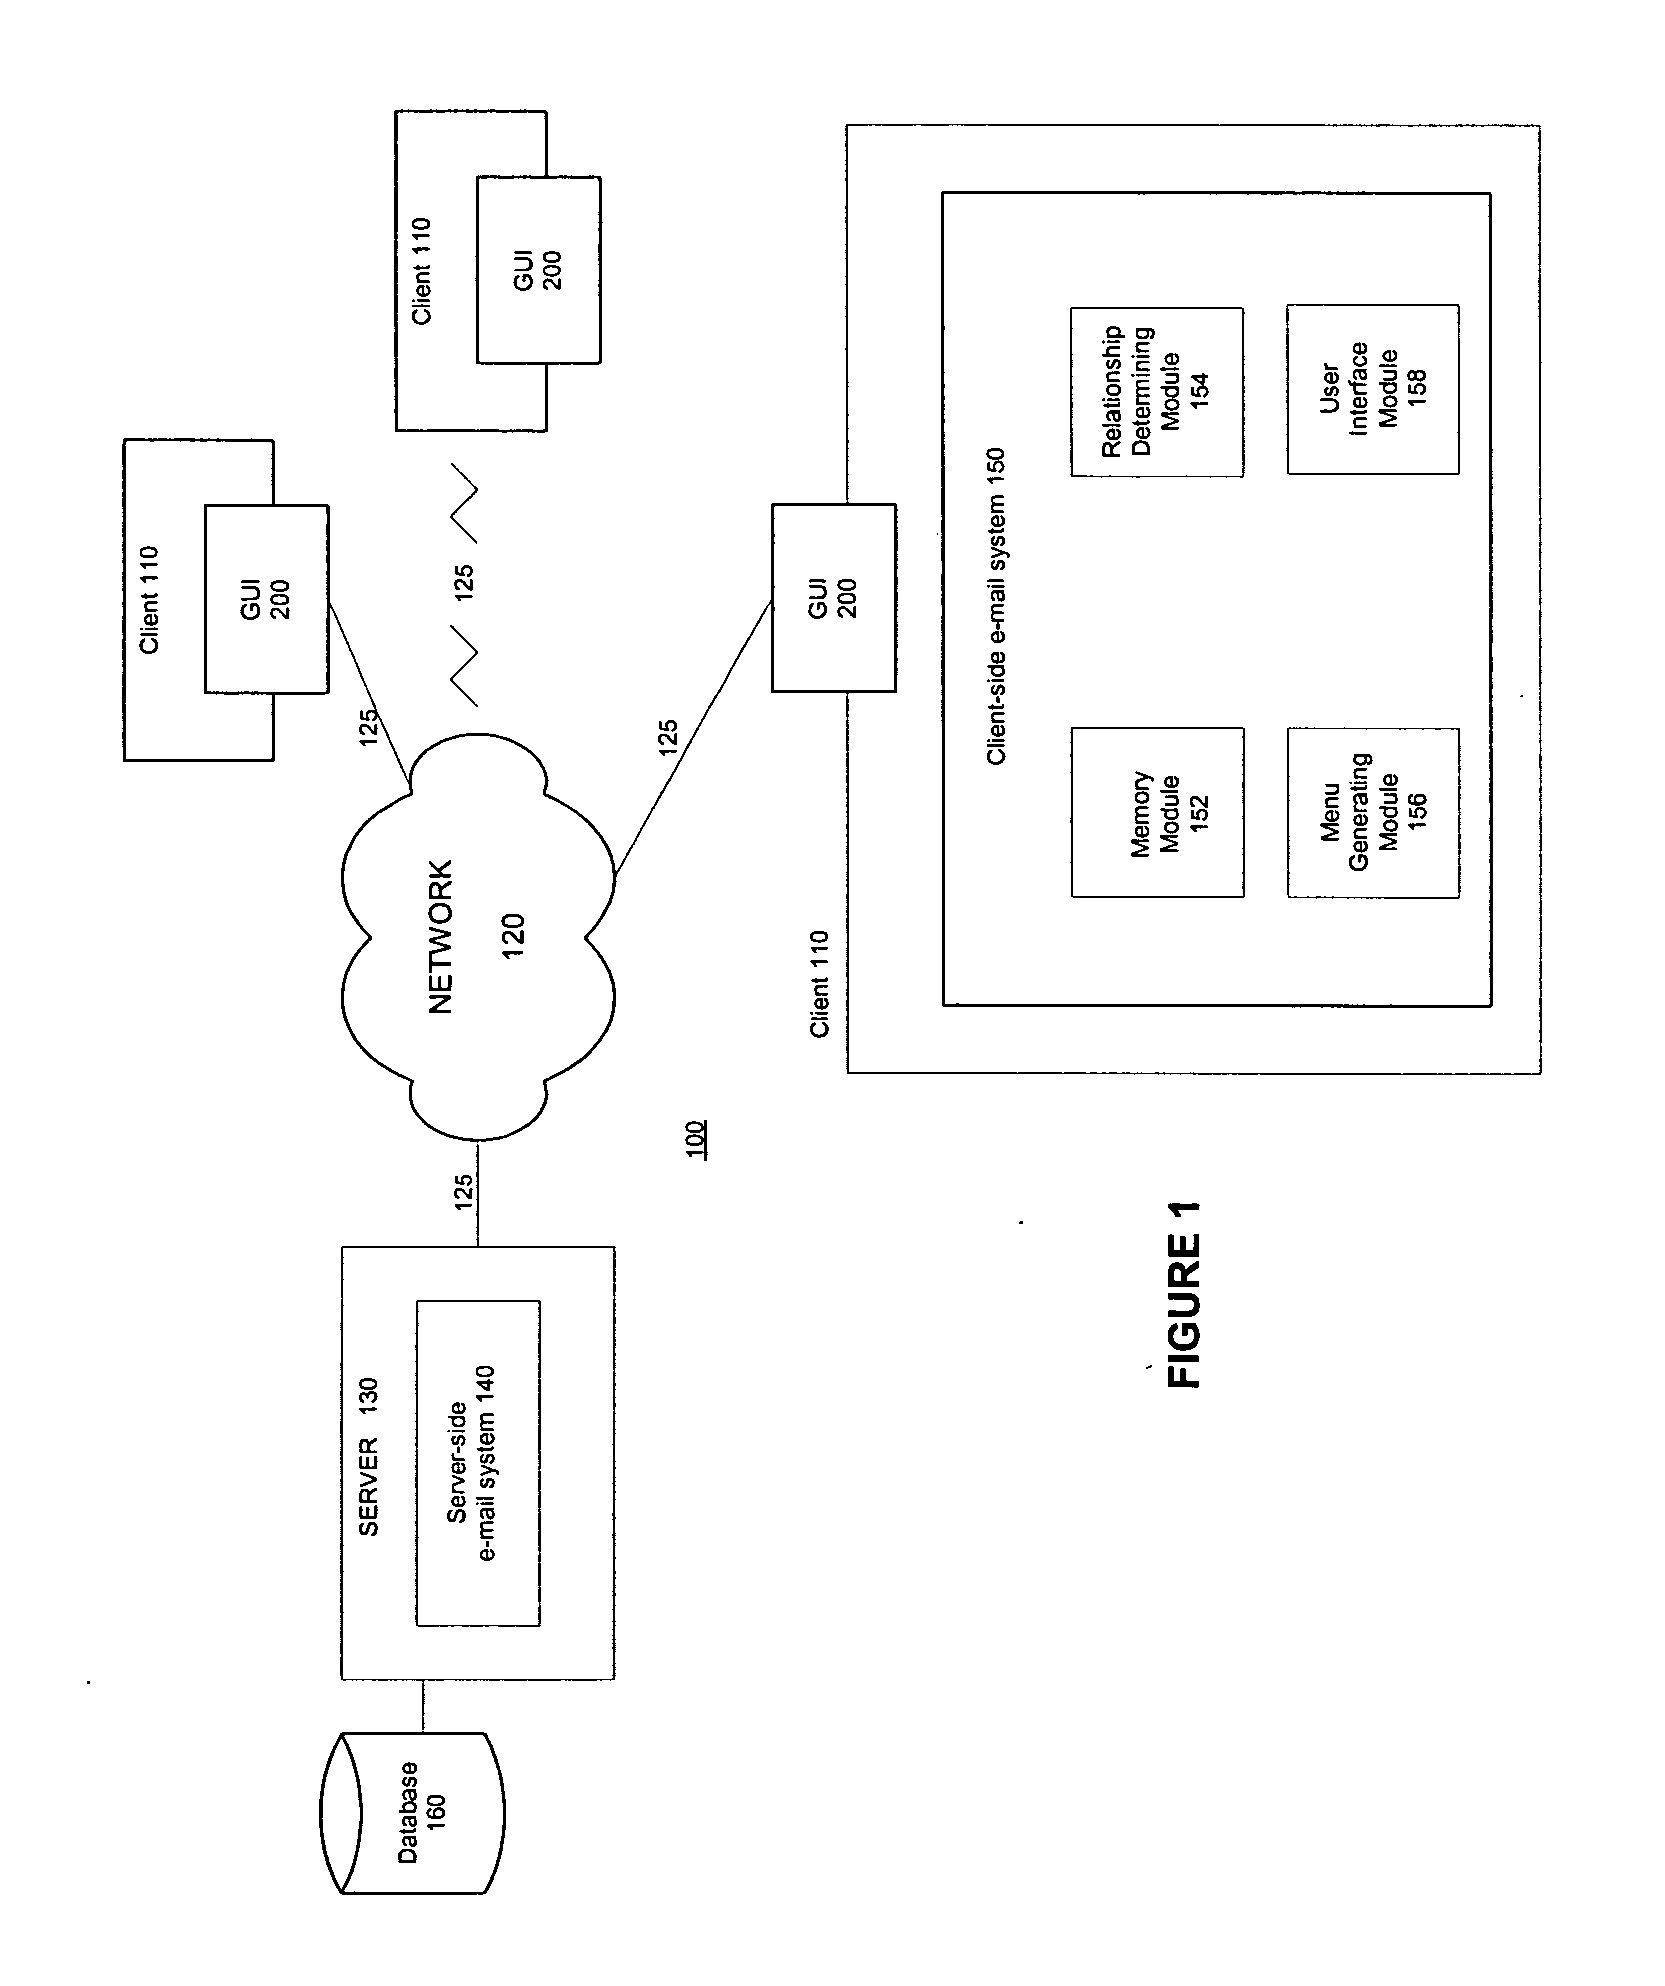 System and method for illustrating a menu of insights associated with visualizations